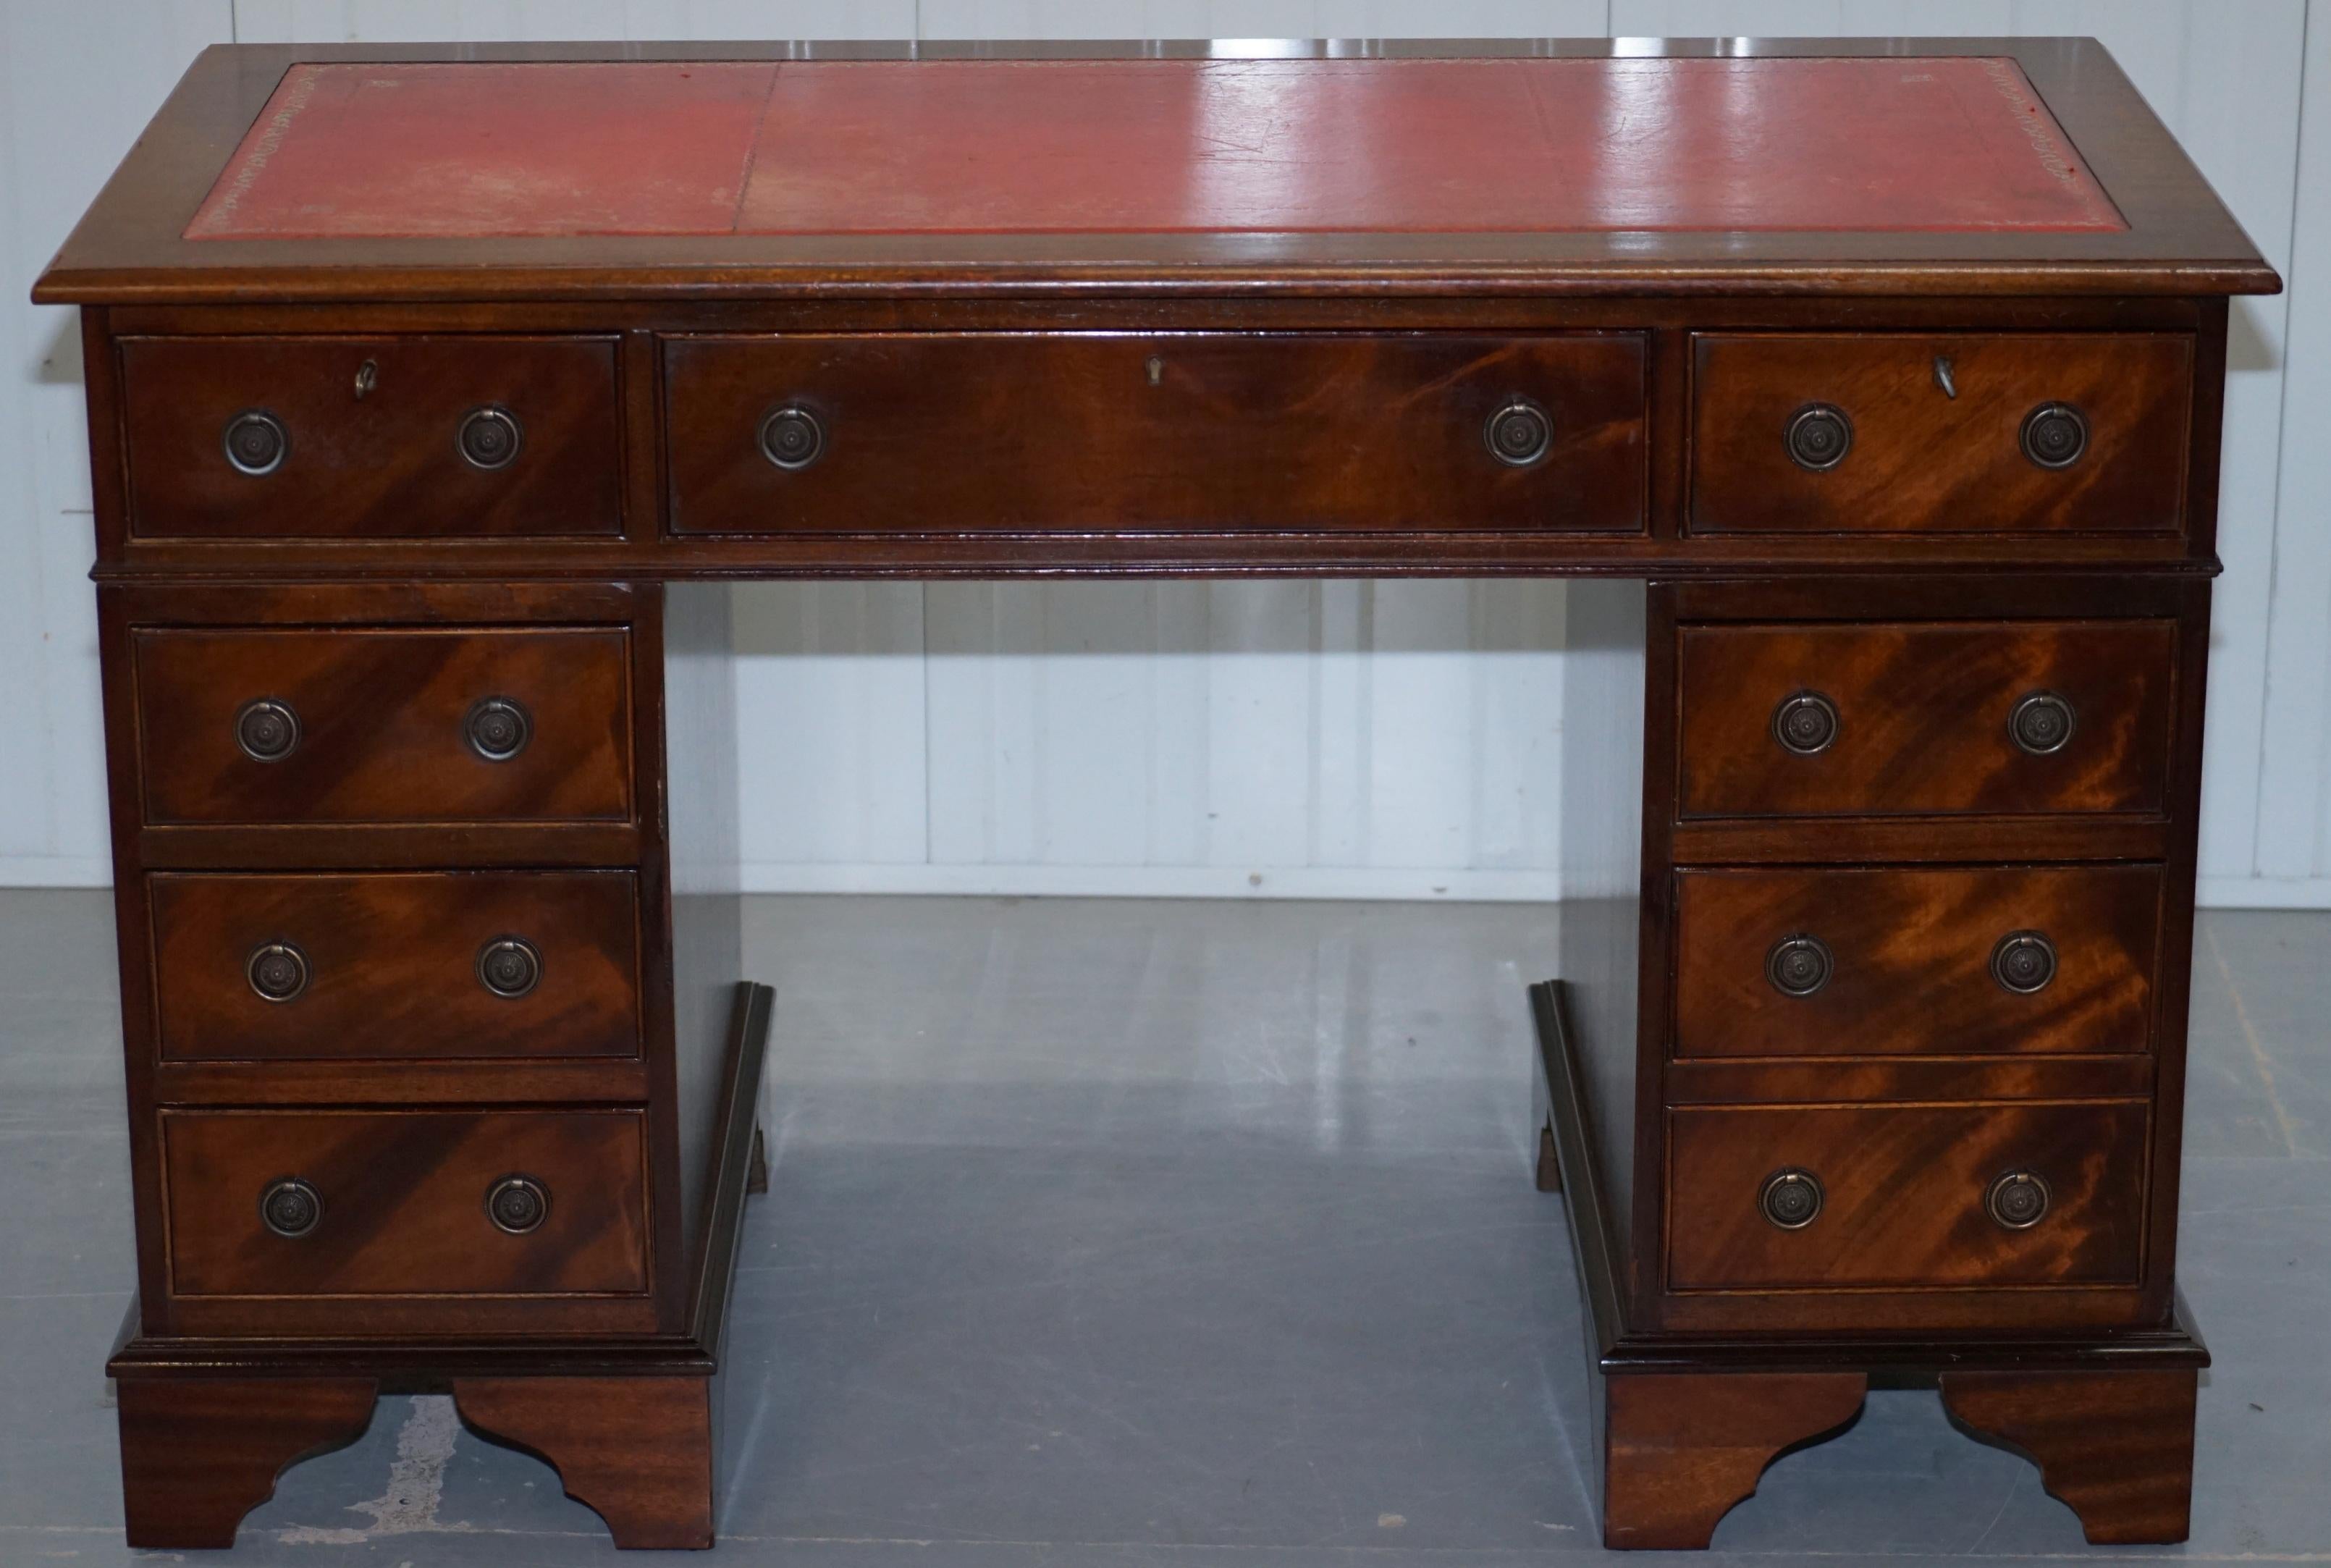 We are delighted to offer for sale this vintage Bevan Funnell twin pedestal partner desk finished in luxury flamed mahogany and with an oxblood leather top

A very good looking and well-made desk with a lovely timber patina, the leather top is